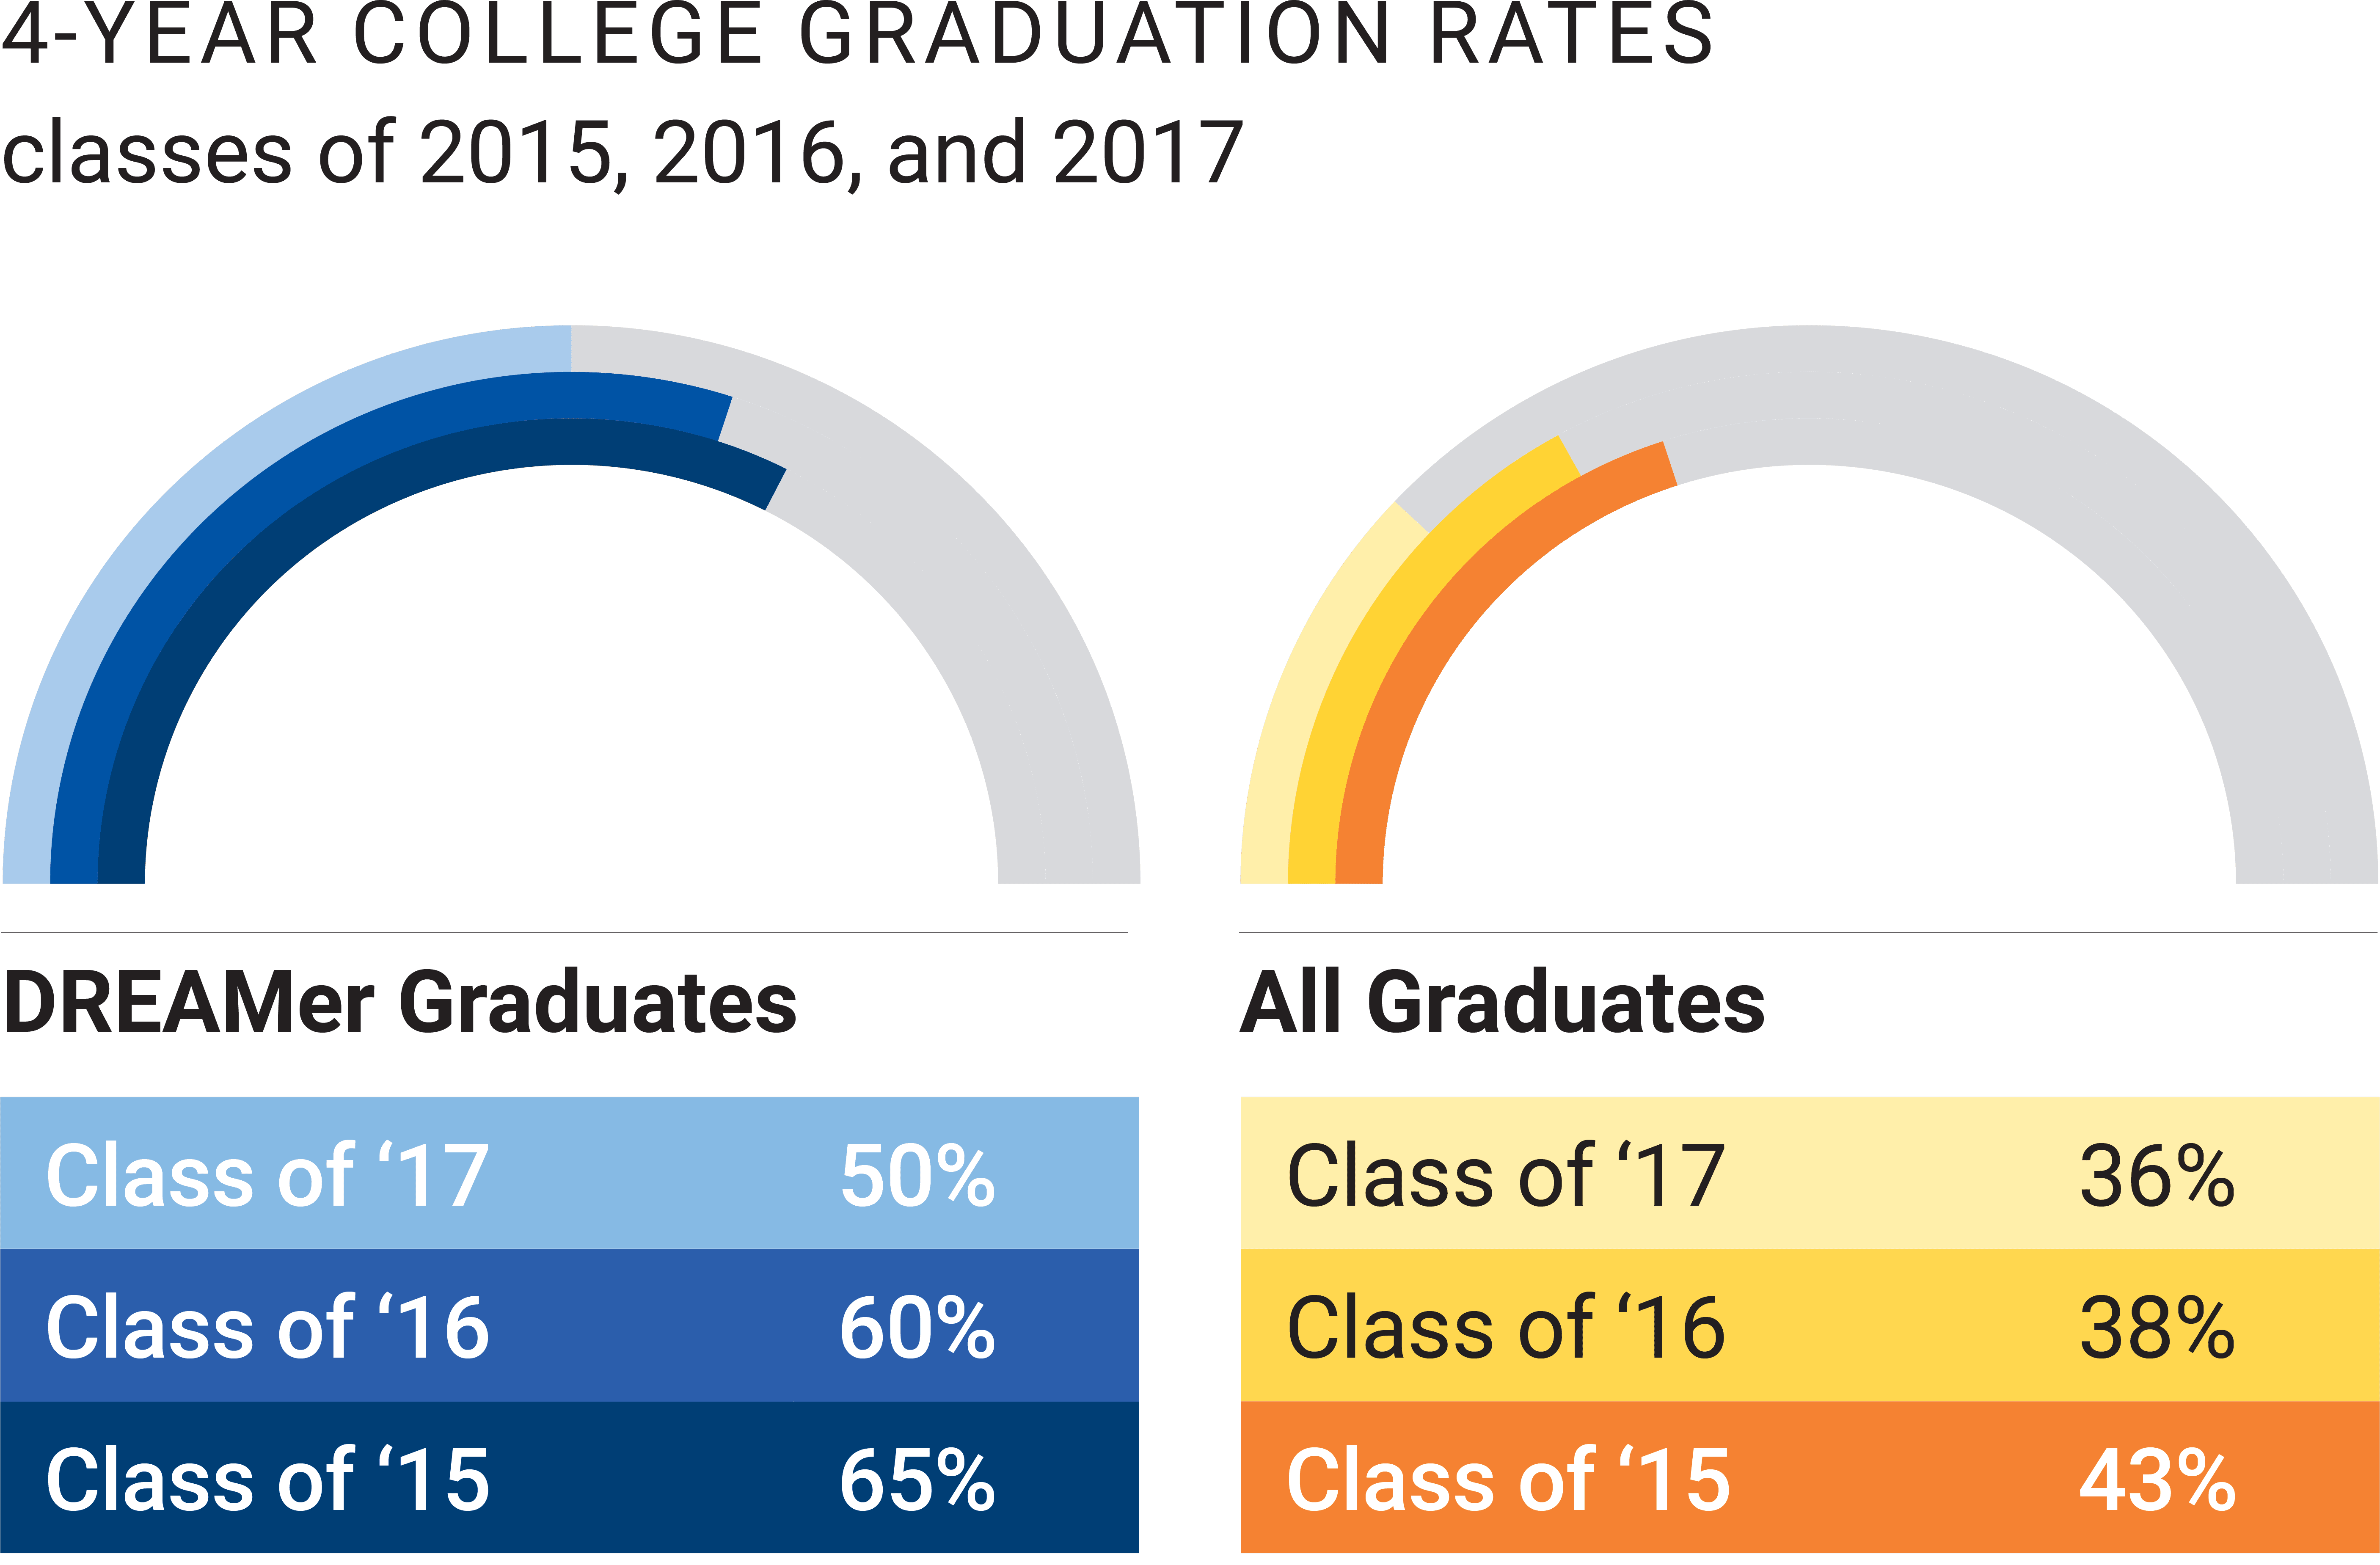 At the top of this graphic, there is a title that reads “Four Year College Graduation Rates, Classes of 2015, 2016, and 2017”. Beneath that, there are two half circles with three different colored bars running along the circumference. The bars are meant to represent the graduation rates of three different graduating classes. They look like curved bar graphs. The first half circle is titled “DREAMer Graduates”. The second half circle is titled “All Graduates”. Underneath the half circles, there are two charts. Underneath the DREAMer Graduates, the chart shows that fifty percent of DREAMer students from the Noble Schools’ Class of 2017 graduated from a four year college, sixty percent of DREAMer students from the Noble Schools’ Class of 2016 graduated from a four year college, and sixty-five percent of DREAMer students from the Noble Schools’ Class of 2015 graduated from a four year college. In comparison, there is another chart underneath the “All Graduates” half circle – it shows that thirty-five percent of ALL students from the Noble Schools’ Class of 2017 graduated from a four year college, thirty-eight percent of ALL students from the Noble Schools’ Class of 2016 graduated from a four year college, and fourty-three percent of ALL students from the Noble Schools’ Class of 2015 graduated from a four year college.